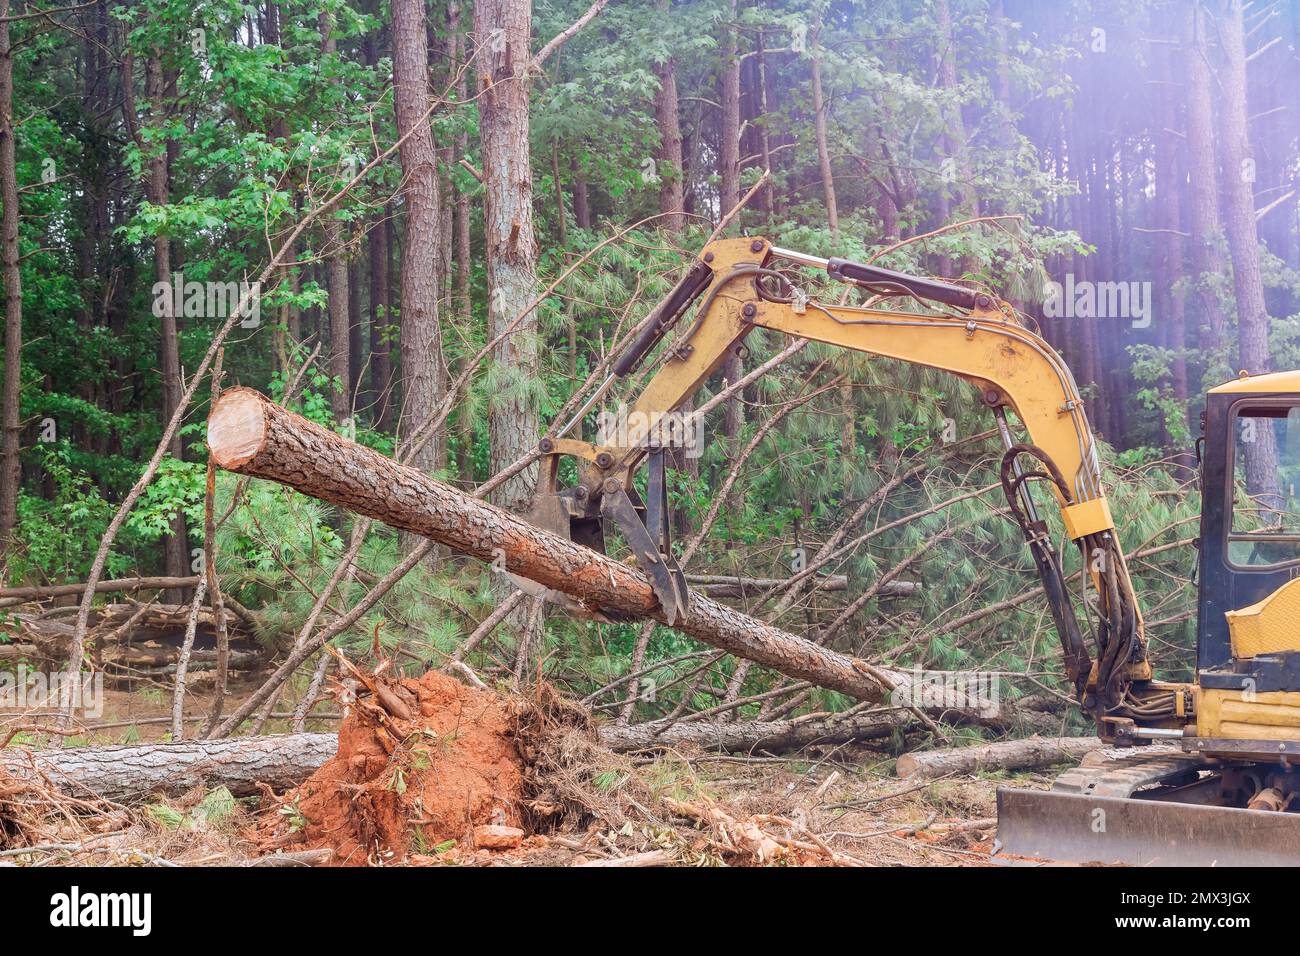 Work deforestation was conducted using tractor manipulators which uprooted trees which lifted logs to prepare land for construction of housing. Stock Photo